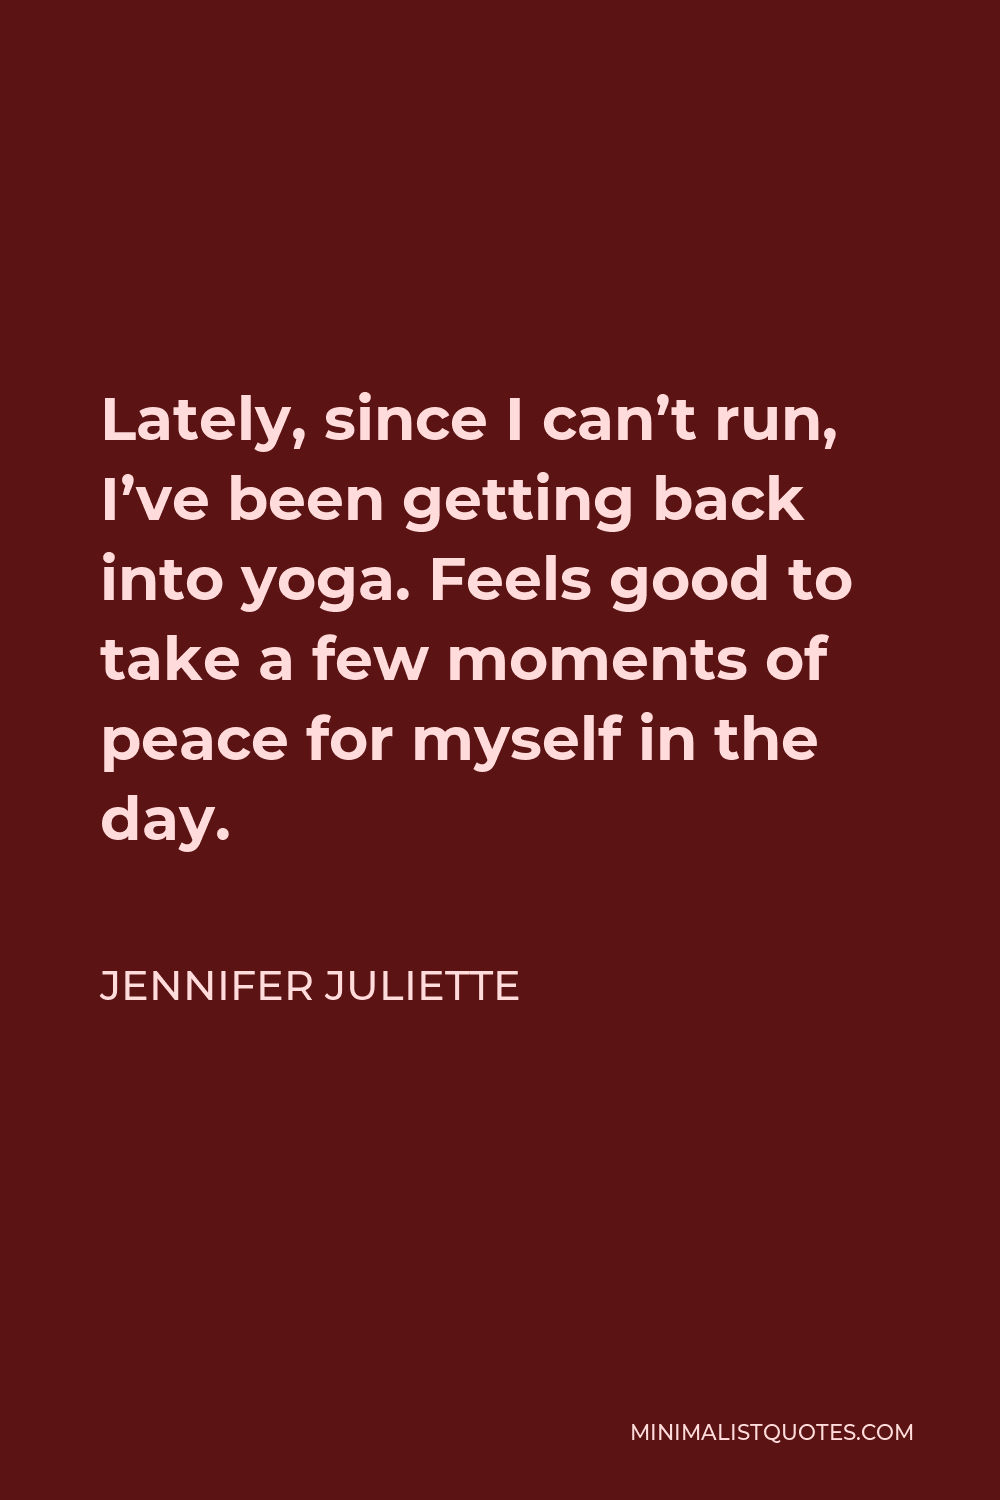 Jennifer Juliette Quote - Lately, since I can’t run, I’ve been getting back into yoga. Feels good to take a few moments of peace for myself in the day.